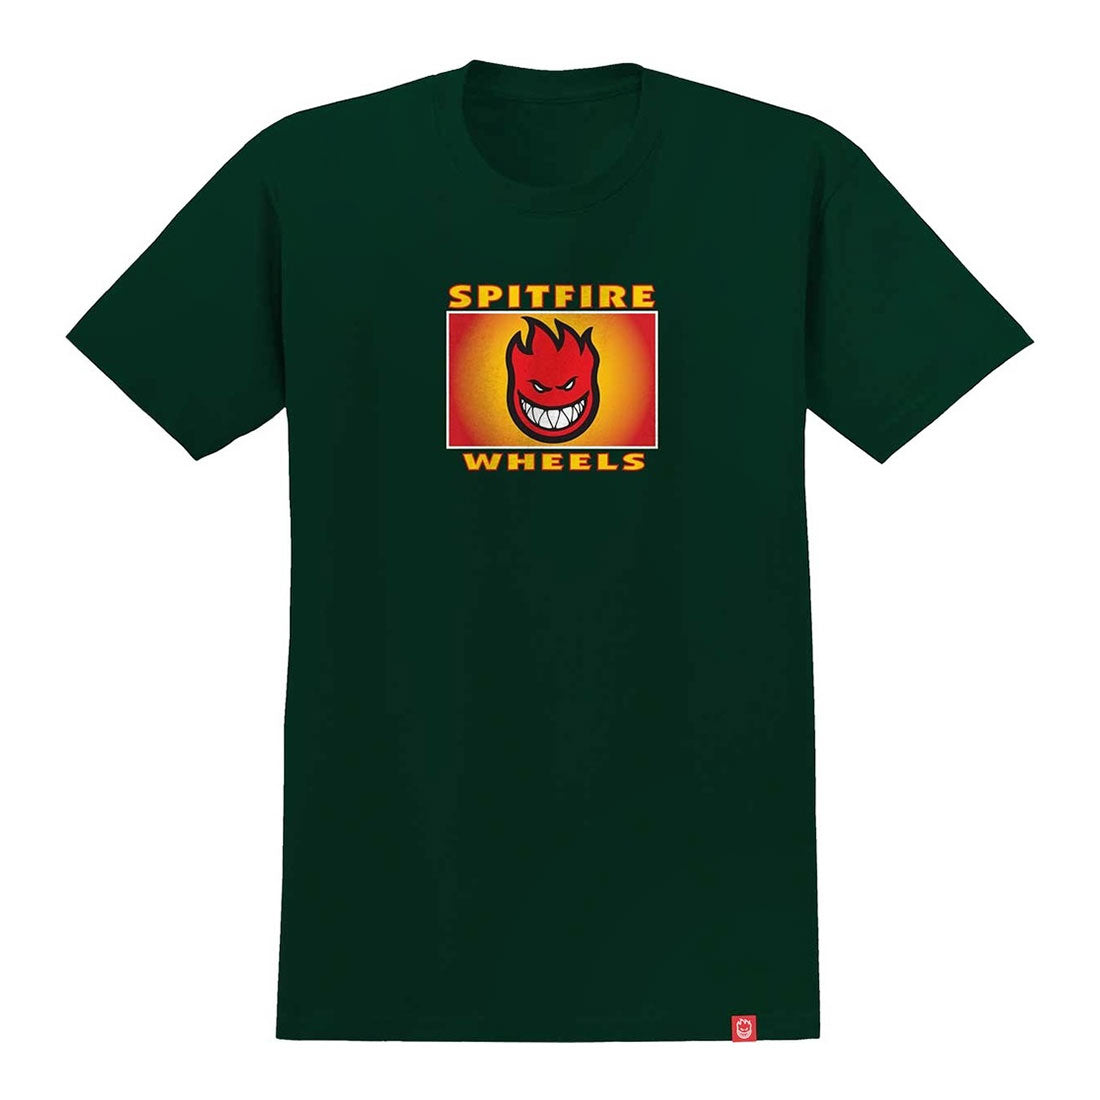 Spitfire Label Tee Green - Small Apparel Tshirts